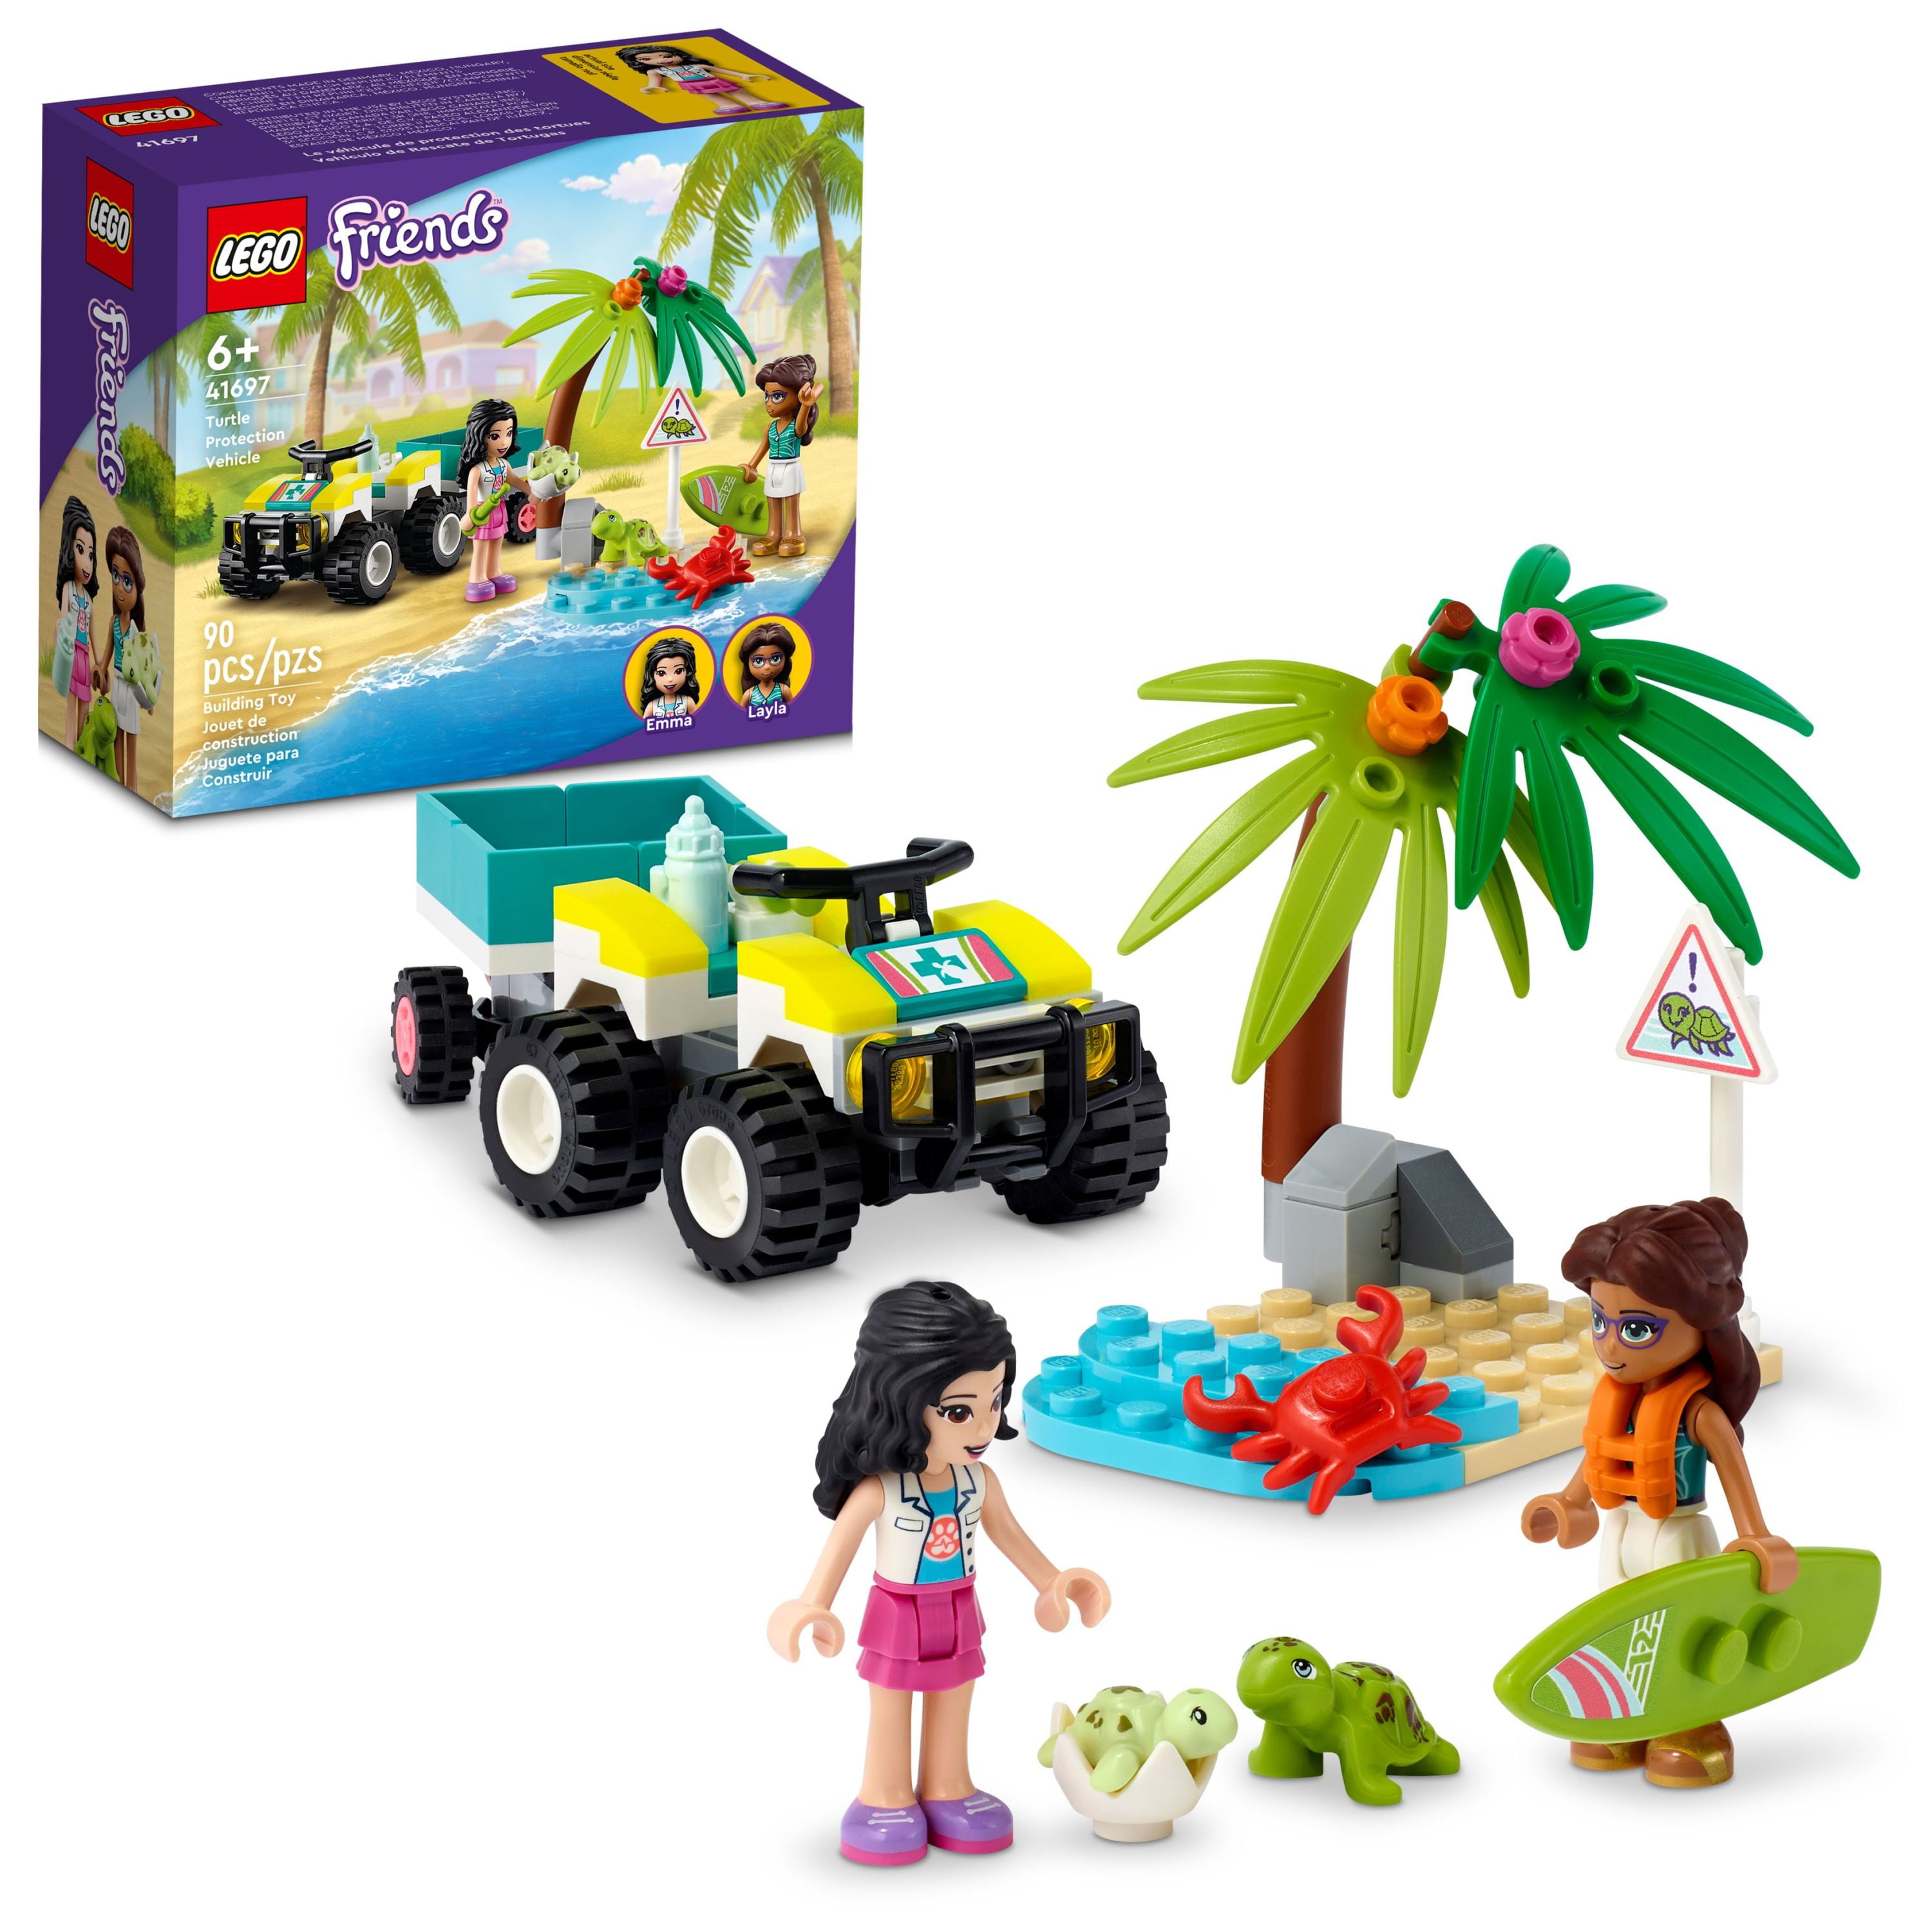 LEGO Friends Turtle Protection Vehicle 41697, Animal Rescue Building Set With ATV, Island, and 2 Mini Figures, Pretend Toy for Animal Loving Kids, Boys, Girls Age 6+ Years Old -